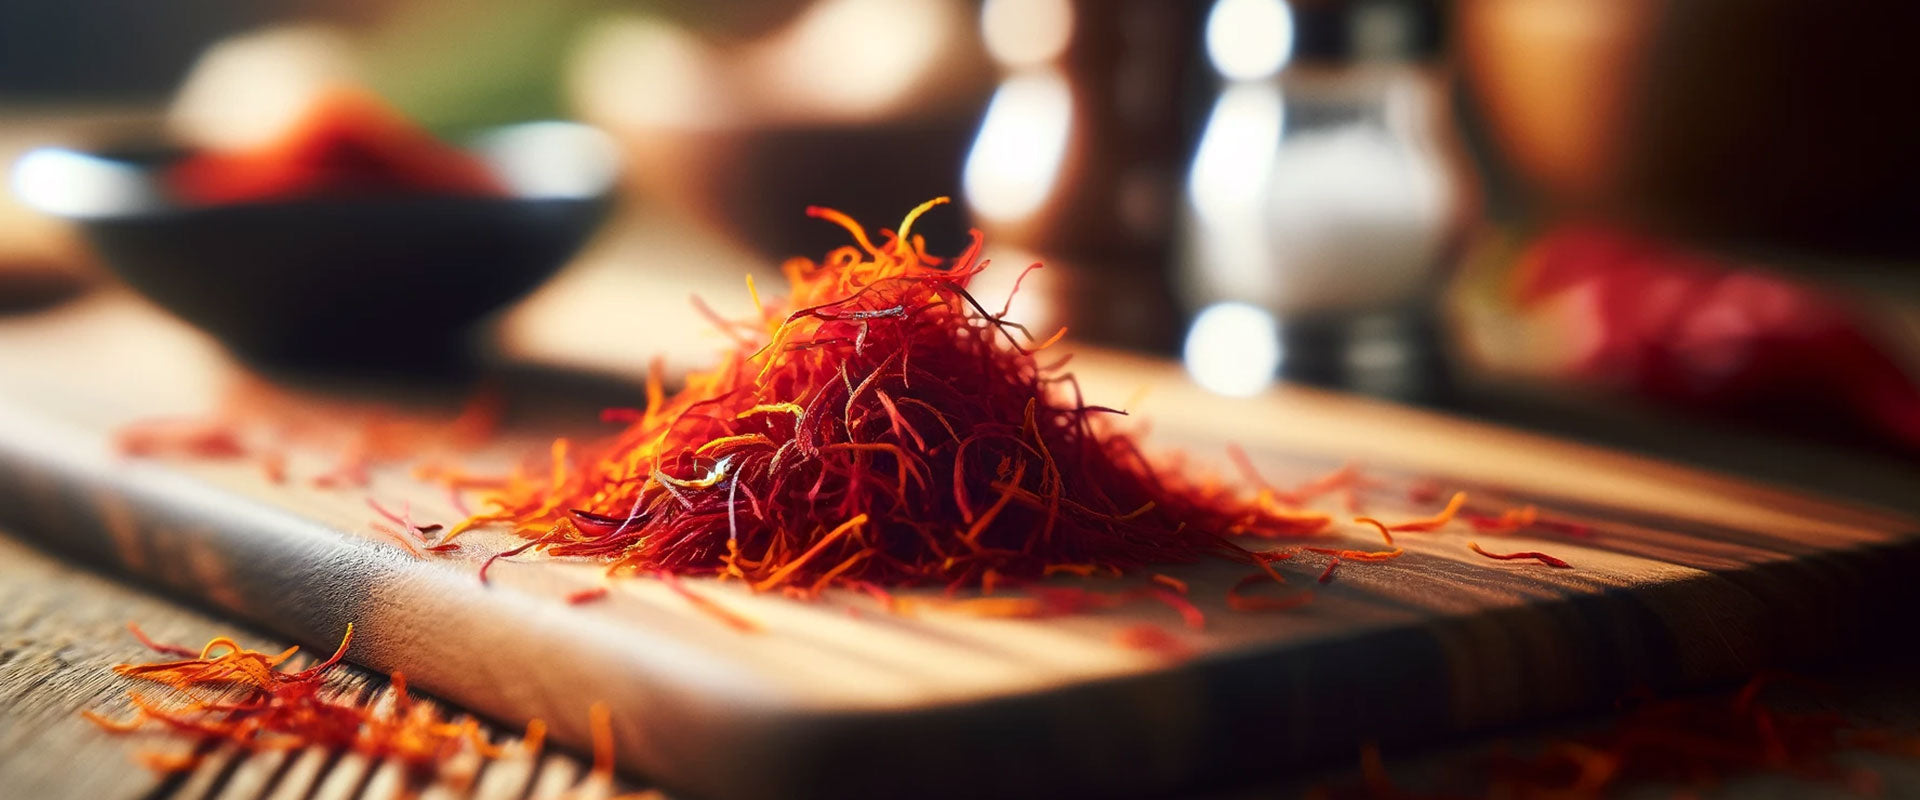 saffron for natural yellow food coloring and dye